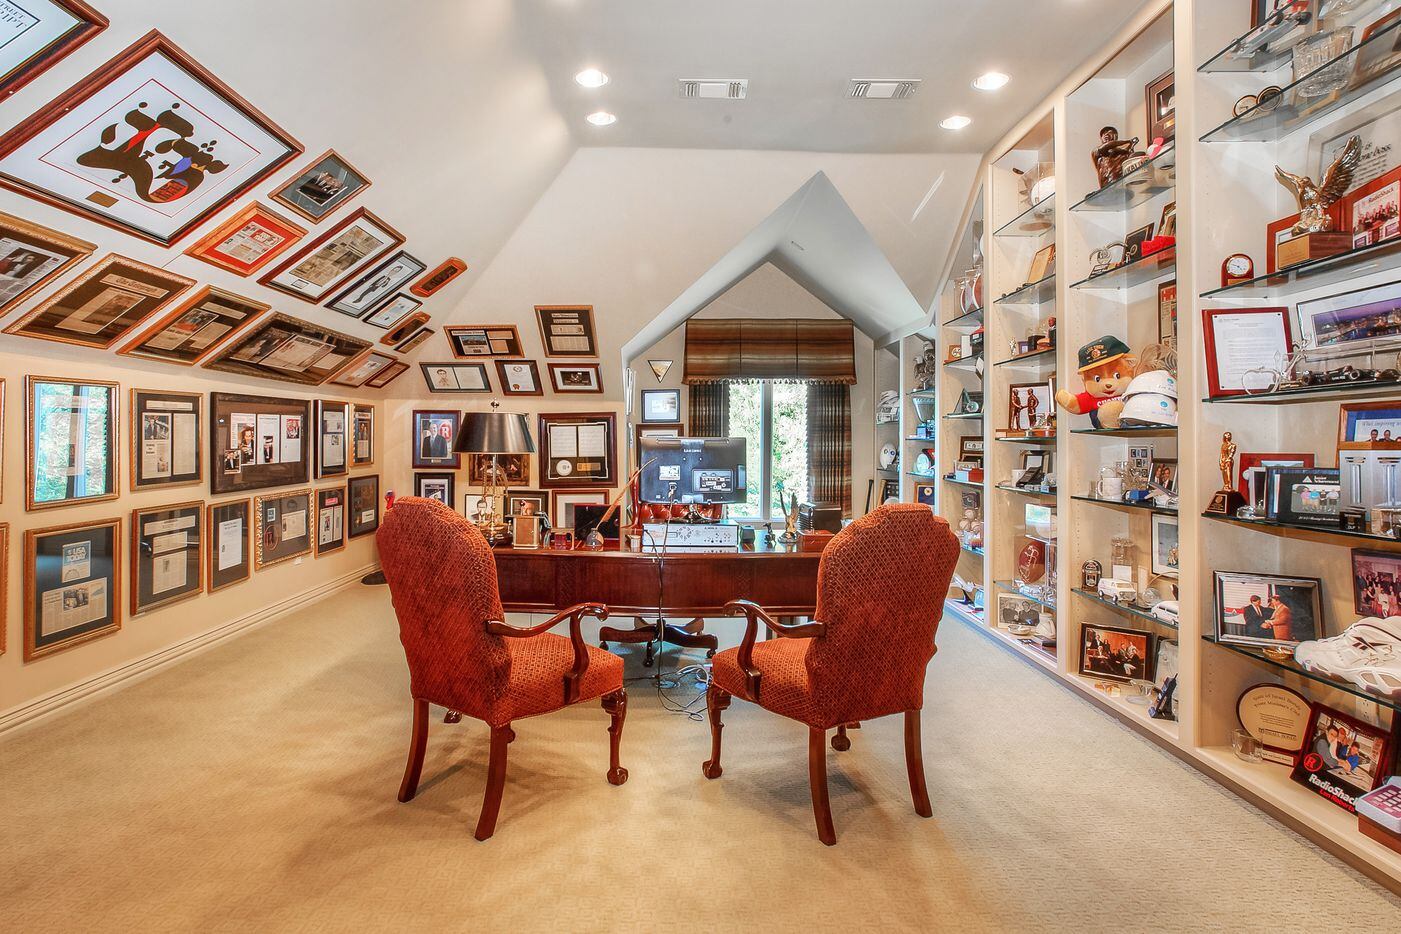 Former RadioShack CEO Len Roberts is auctioning off his 12,000-square-foot Fort Worth estate...